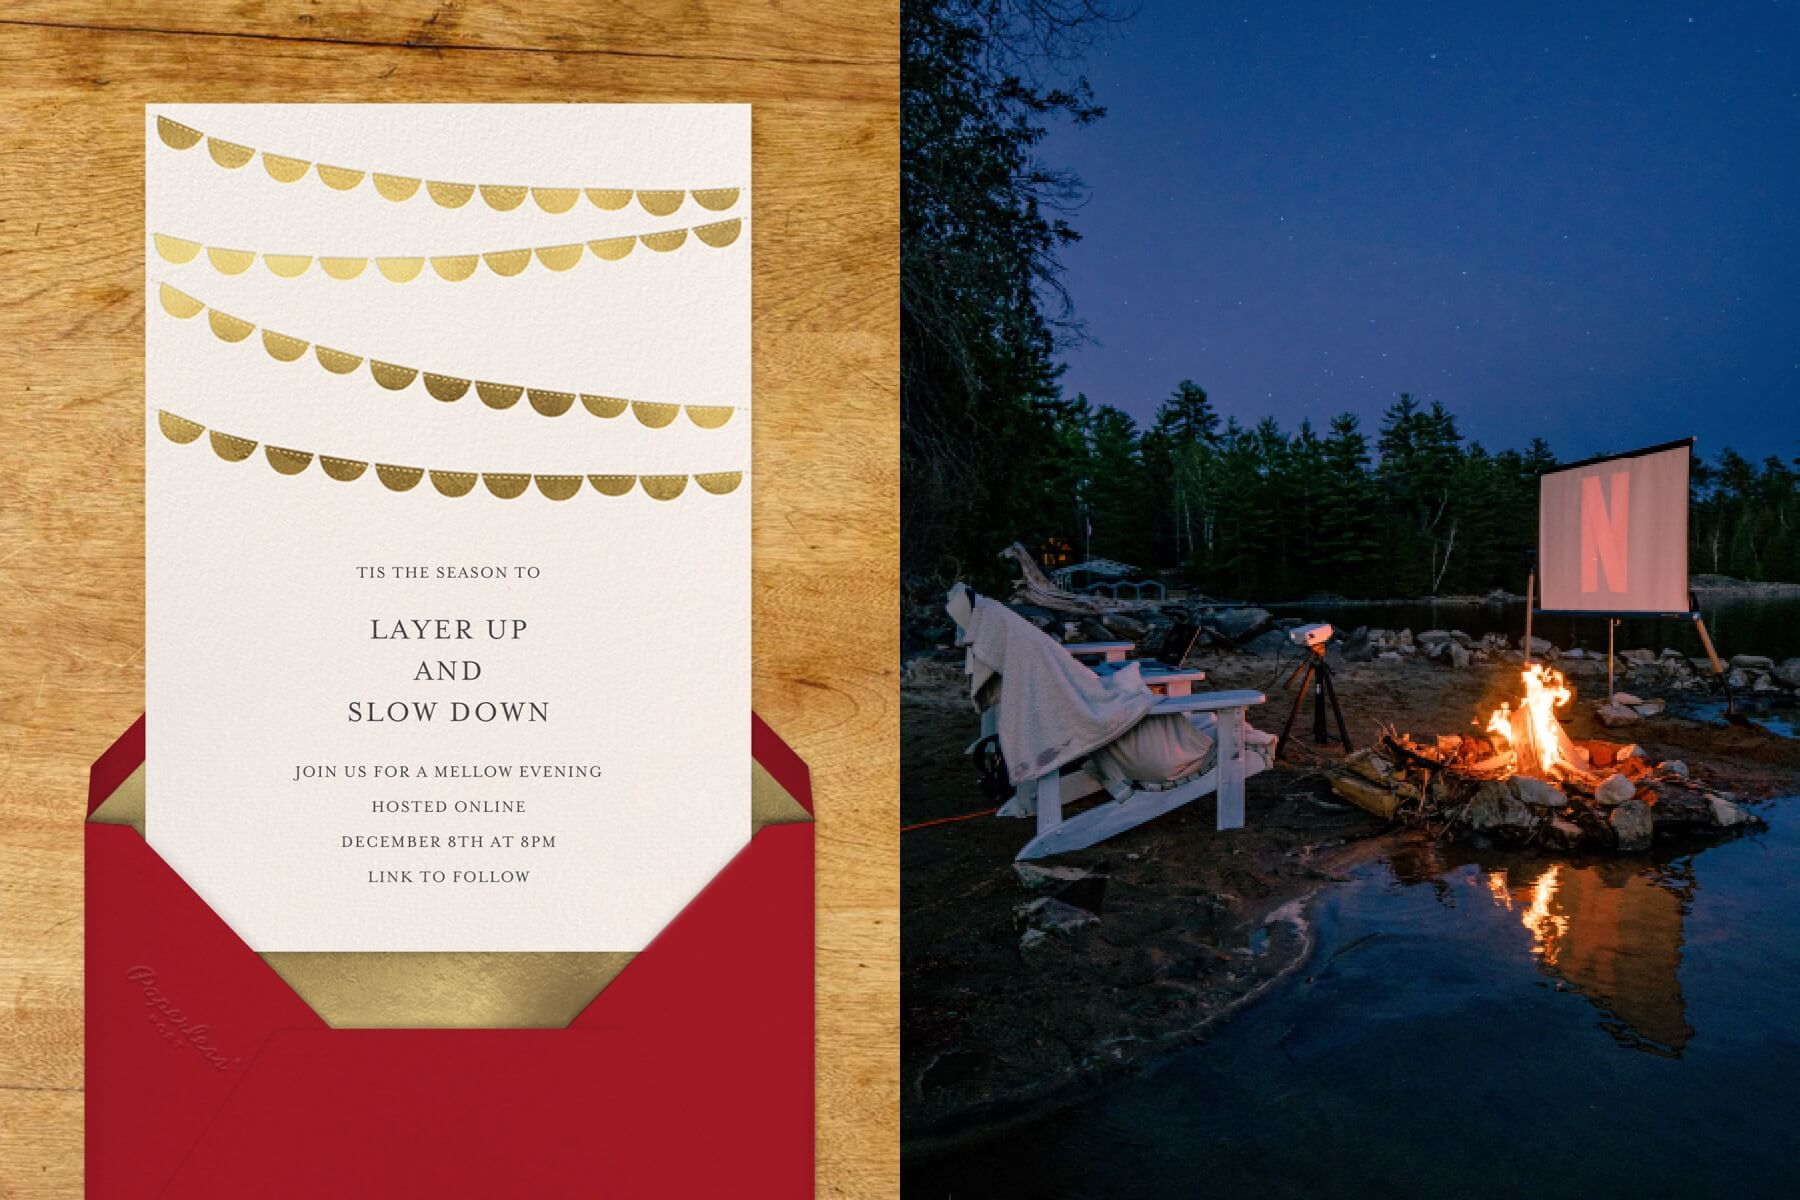 An invitation with gold foil bunting banner. Right: A nighttime scene by a lake with Adirondack chairs facing a bonfire and a movie screen. 